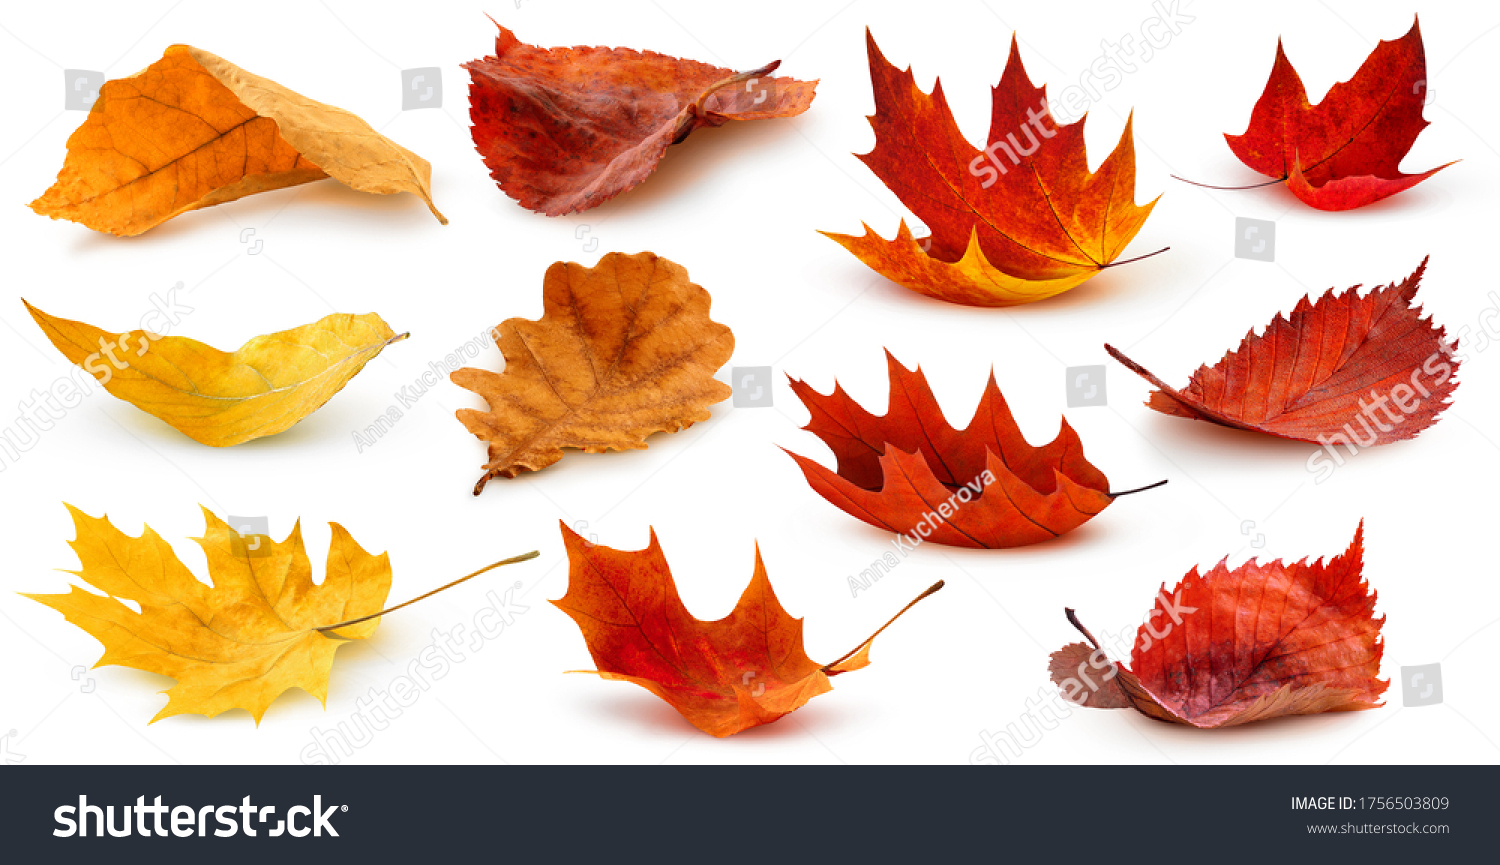 Isolated leaves. Collection of multicolored fallen autumn leaves isolated on white background #1756503809